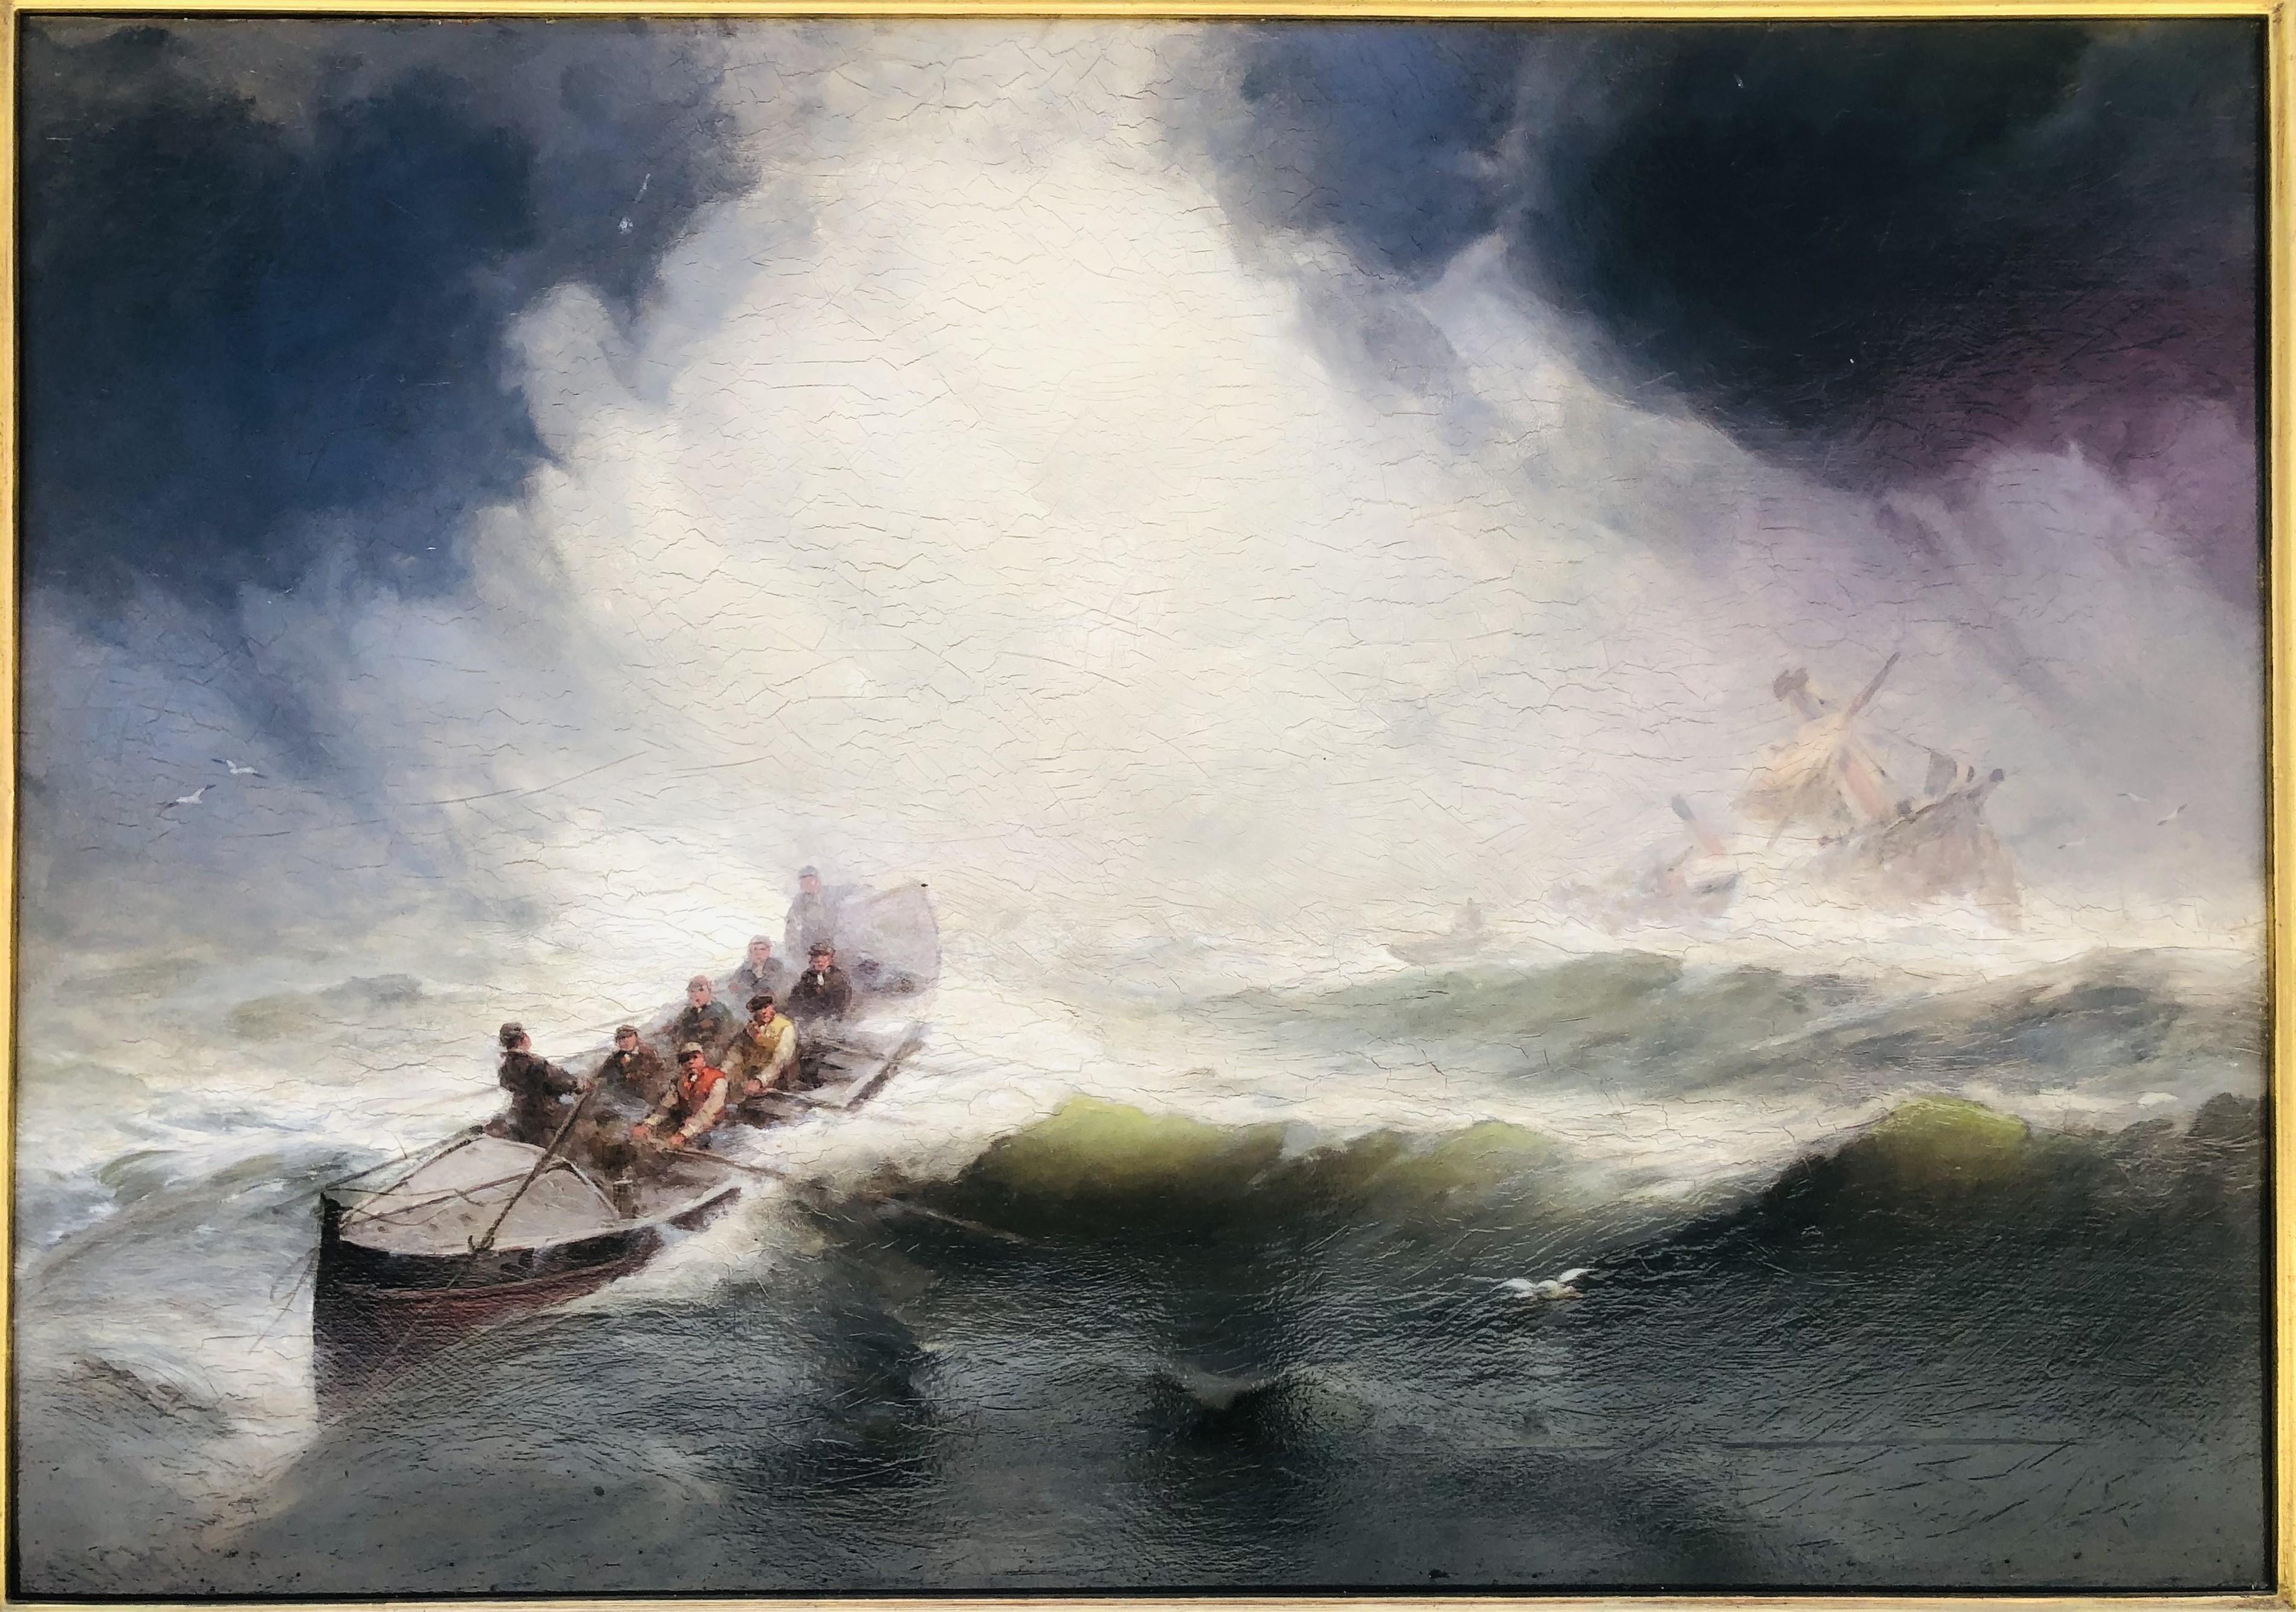 19th C New Jersey Surfmen Rescuing Foundering Ship - GW Nicholson - Painting by George Washington Nicholson